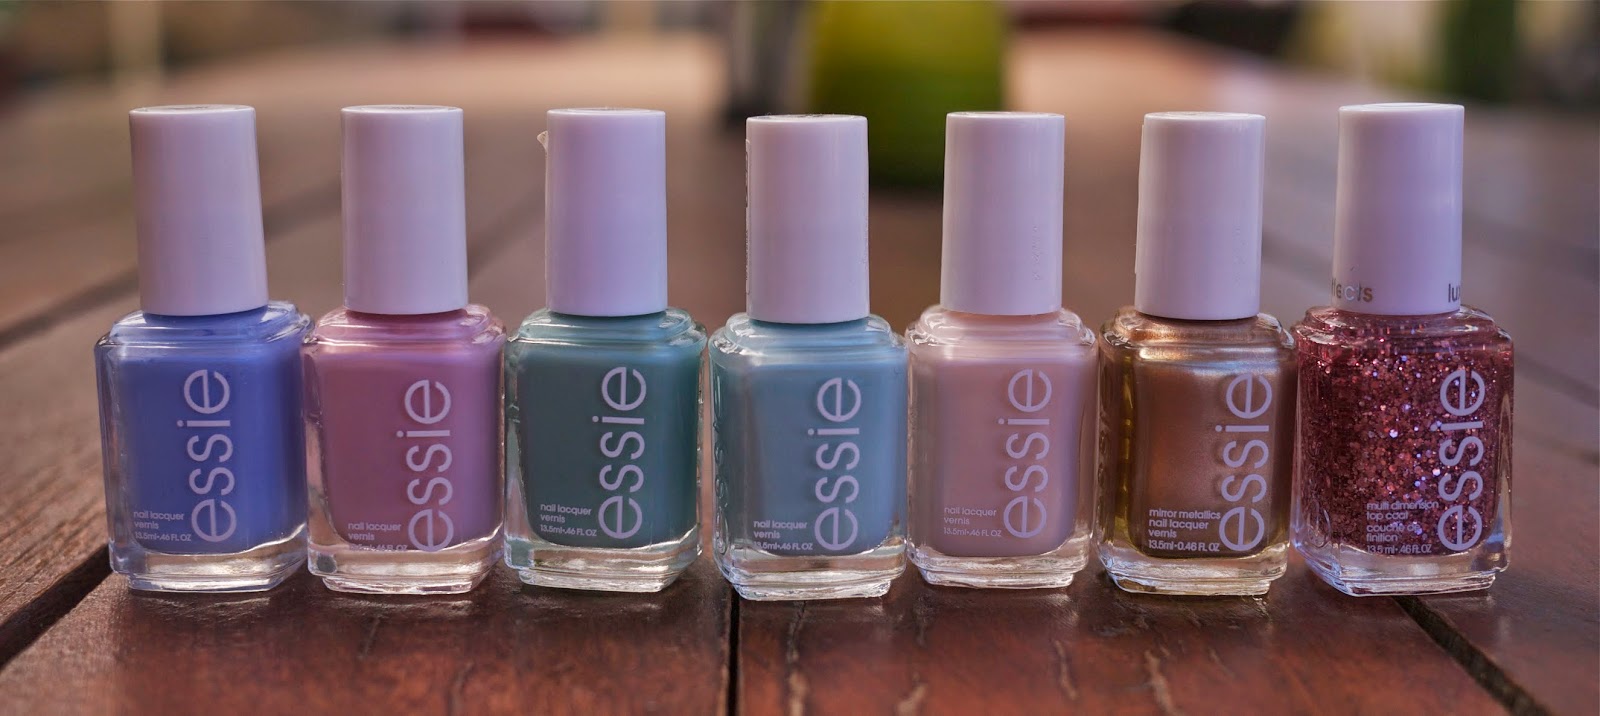 Updated Essie Nail Polish Collection with Review and Swatches - Born to Buy